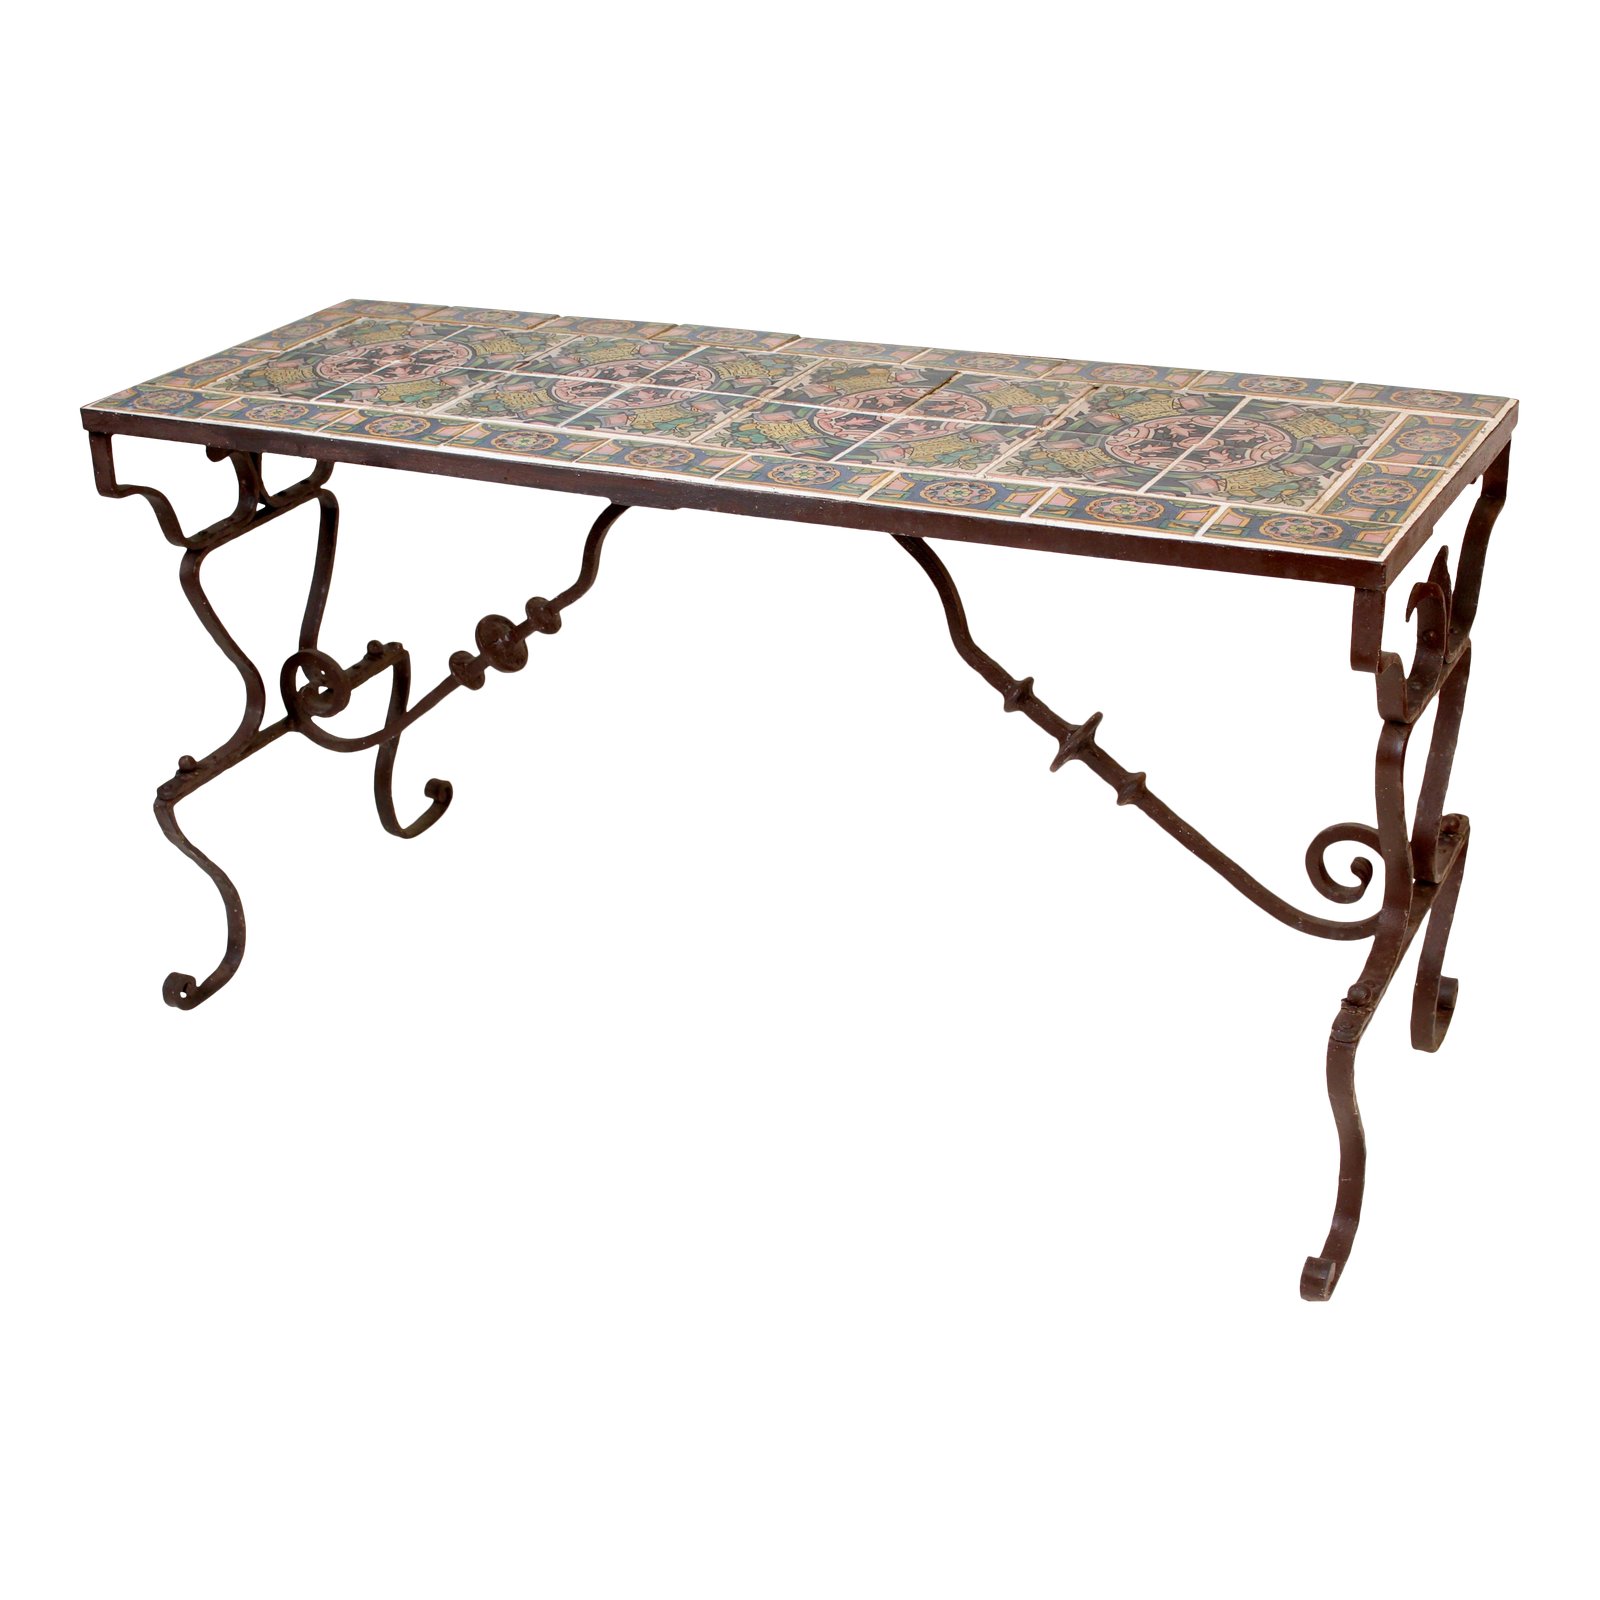 spanish tile top wrought iron patio table chairish accent corner furniture bedroom sets small white bedside target outdoor metal coffee designs bar height with leaf bathroom caddy